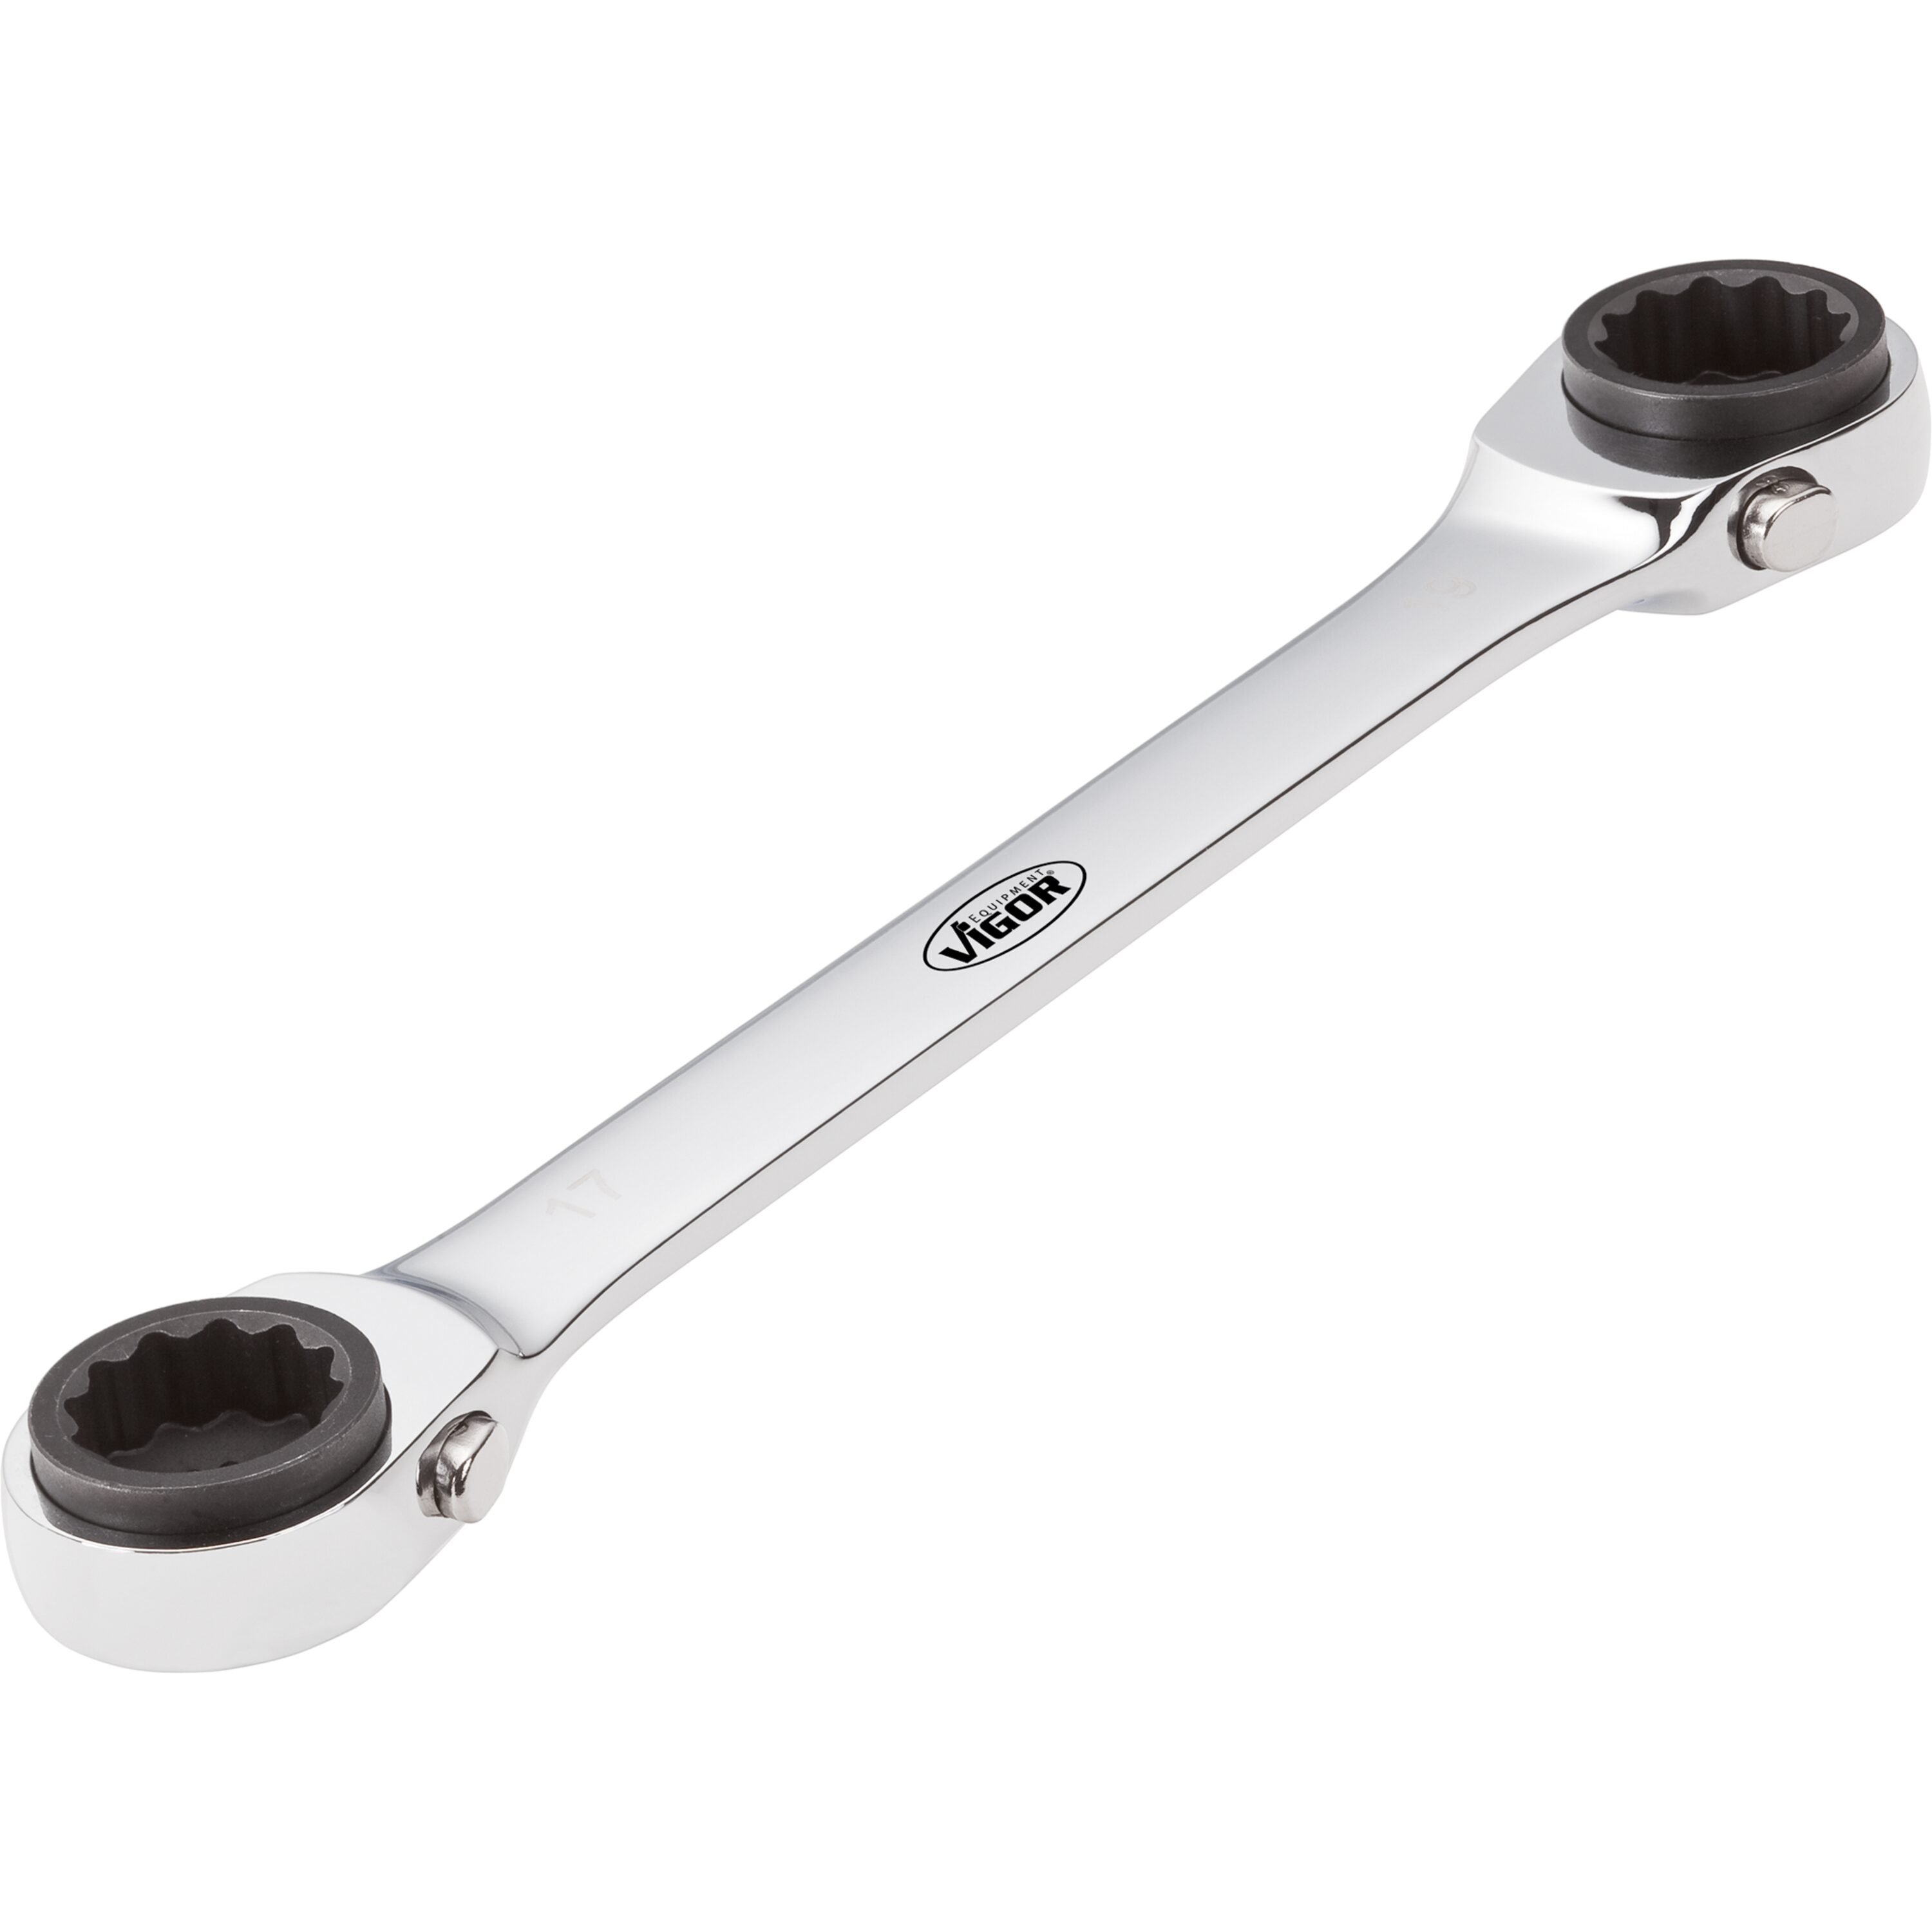 Open-end wrenches, spanners, socket wrenches, etc. Socket wrench, Size: 10 x 13, 17 x 19, Length: 220 mm  Art. V2705